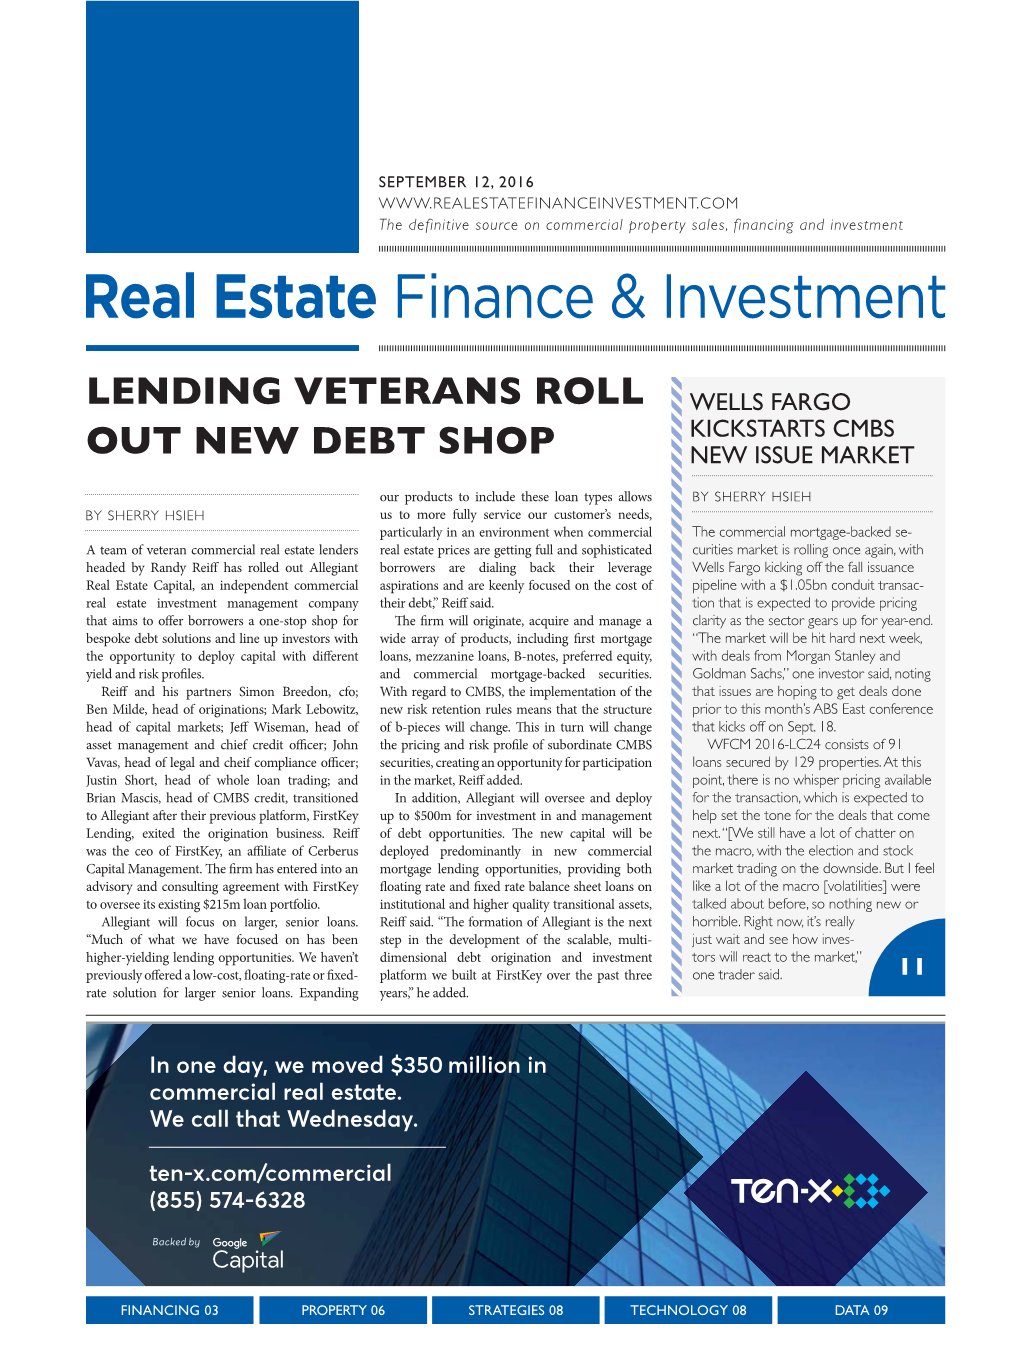 Lending Veterans Roll out New Debt Shop Reiff and His Partners Are Responding to Can Now Offer Both of These Products